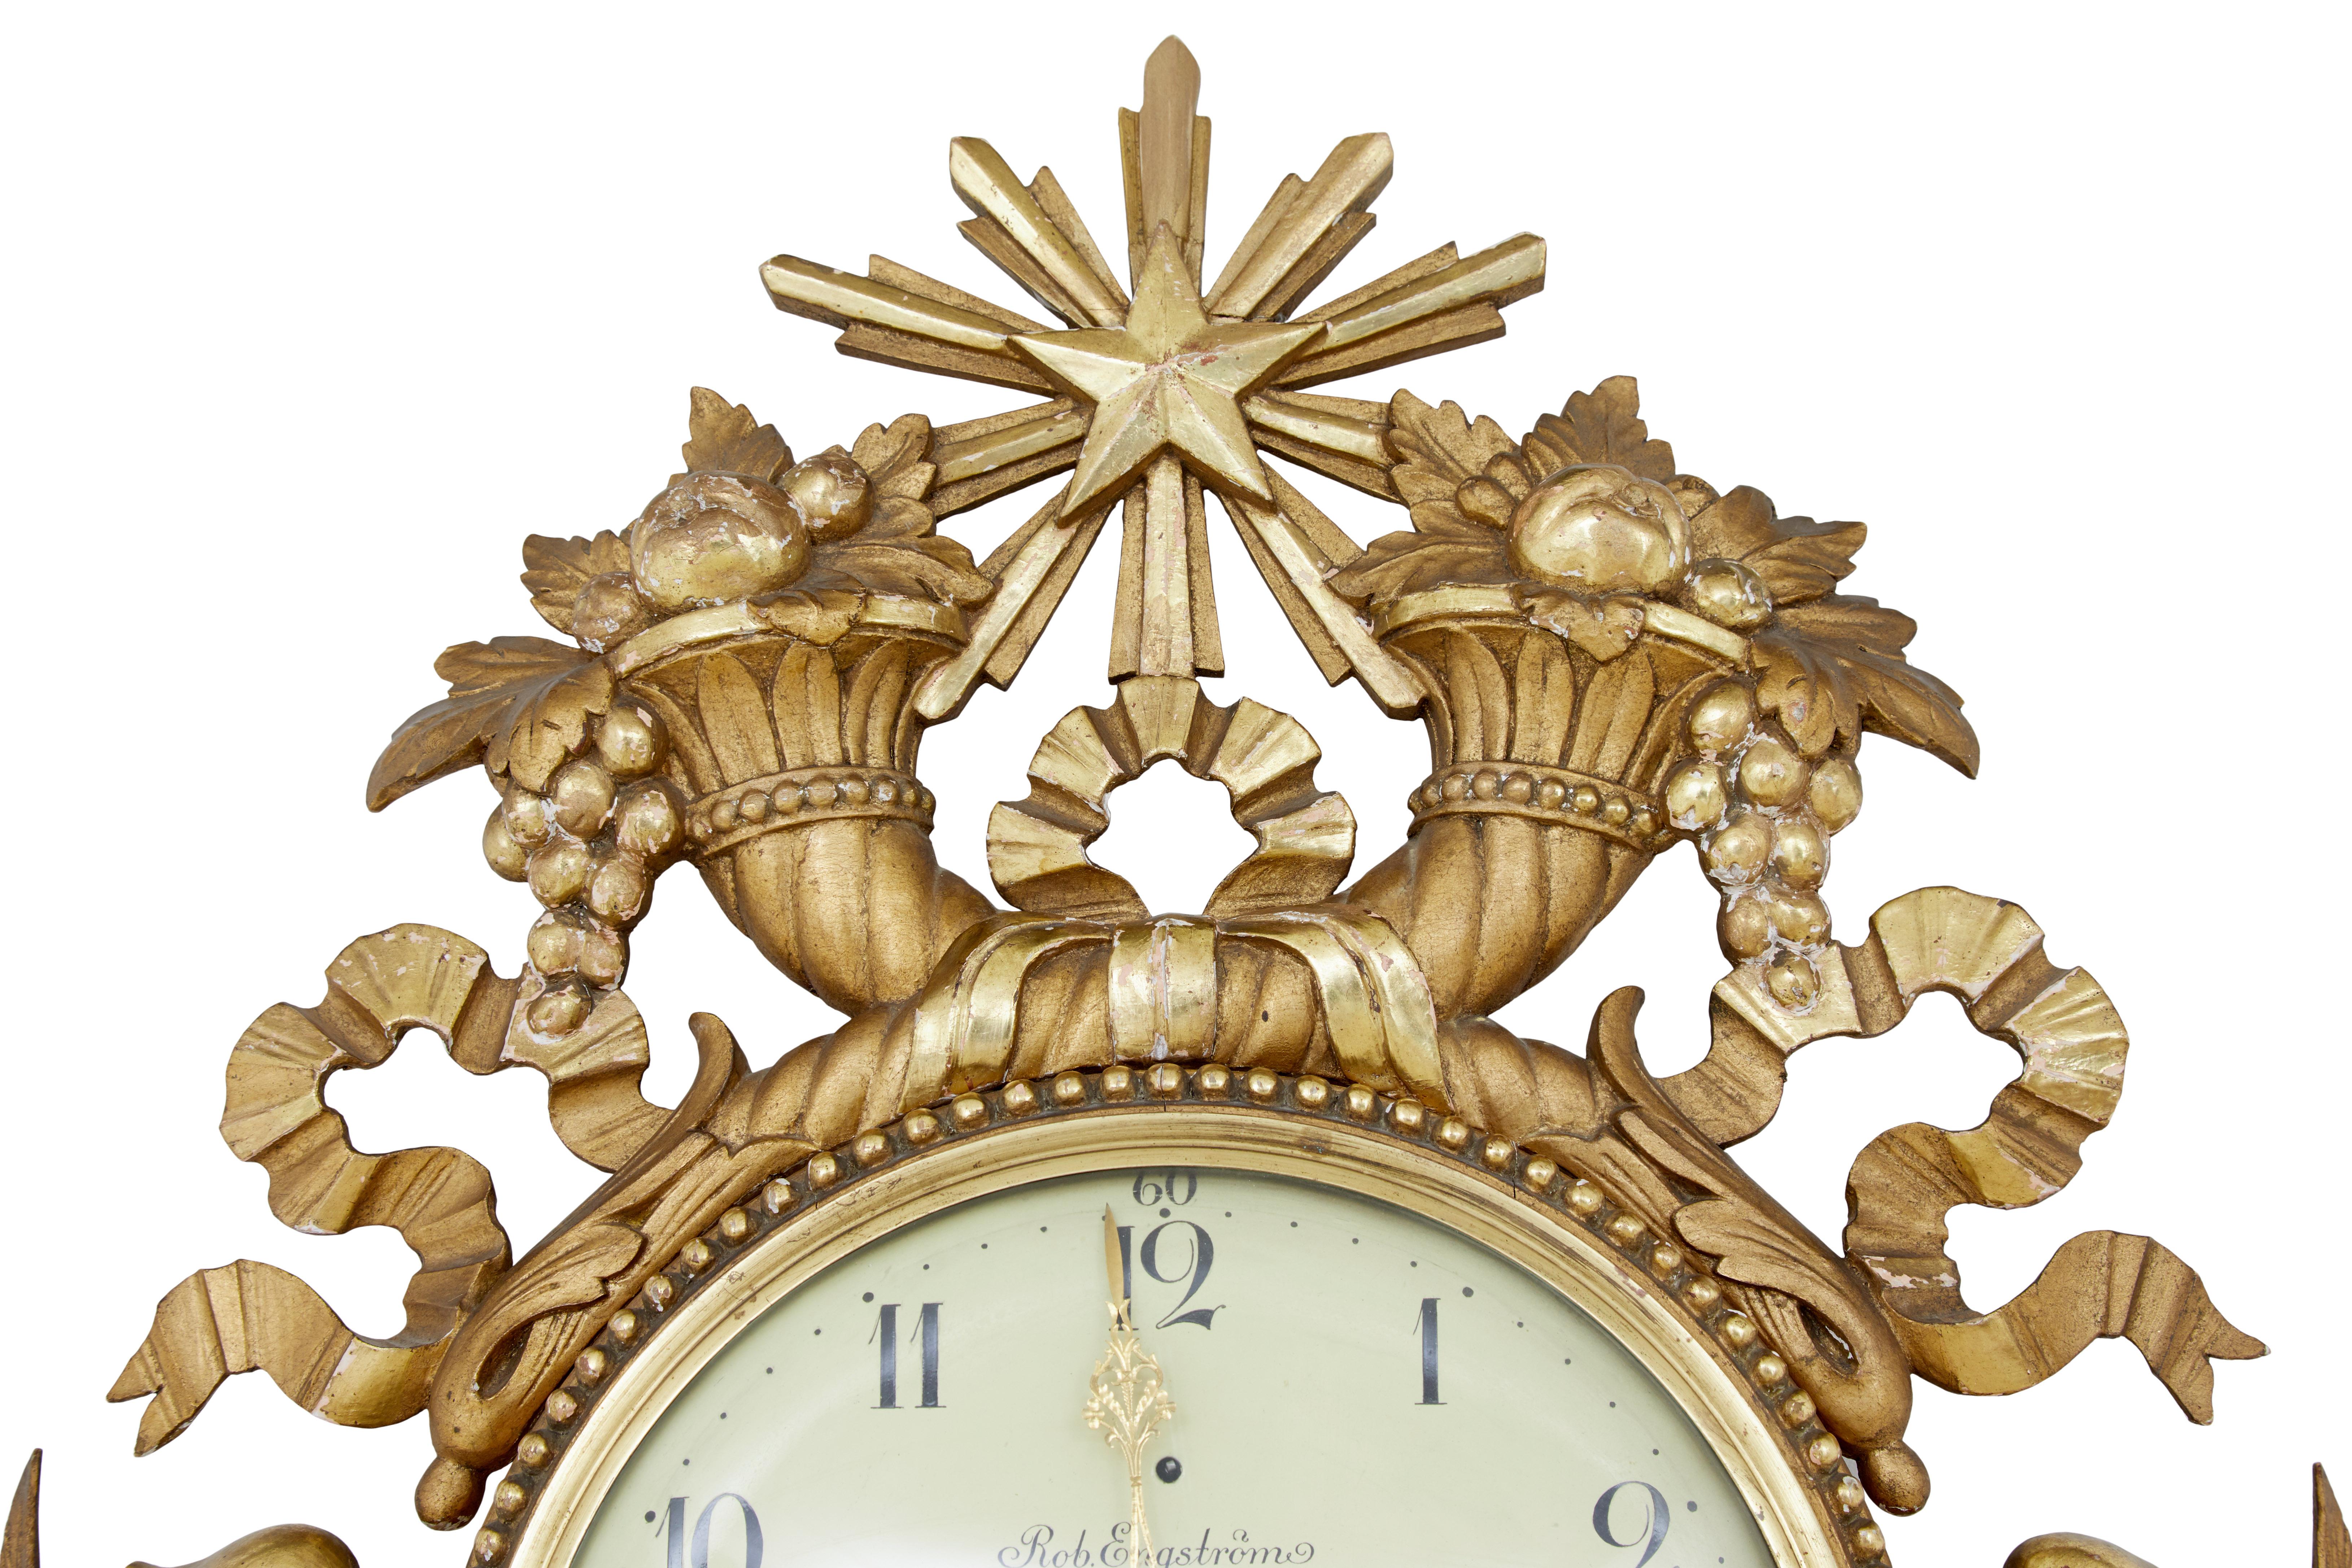 Neoclassical Gilt 19th century Swedish wall clock by Engstrom